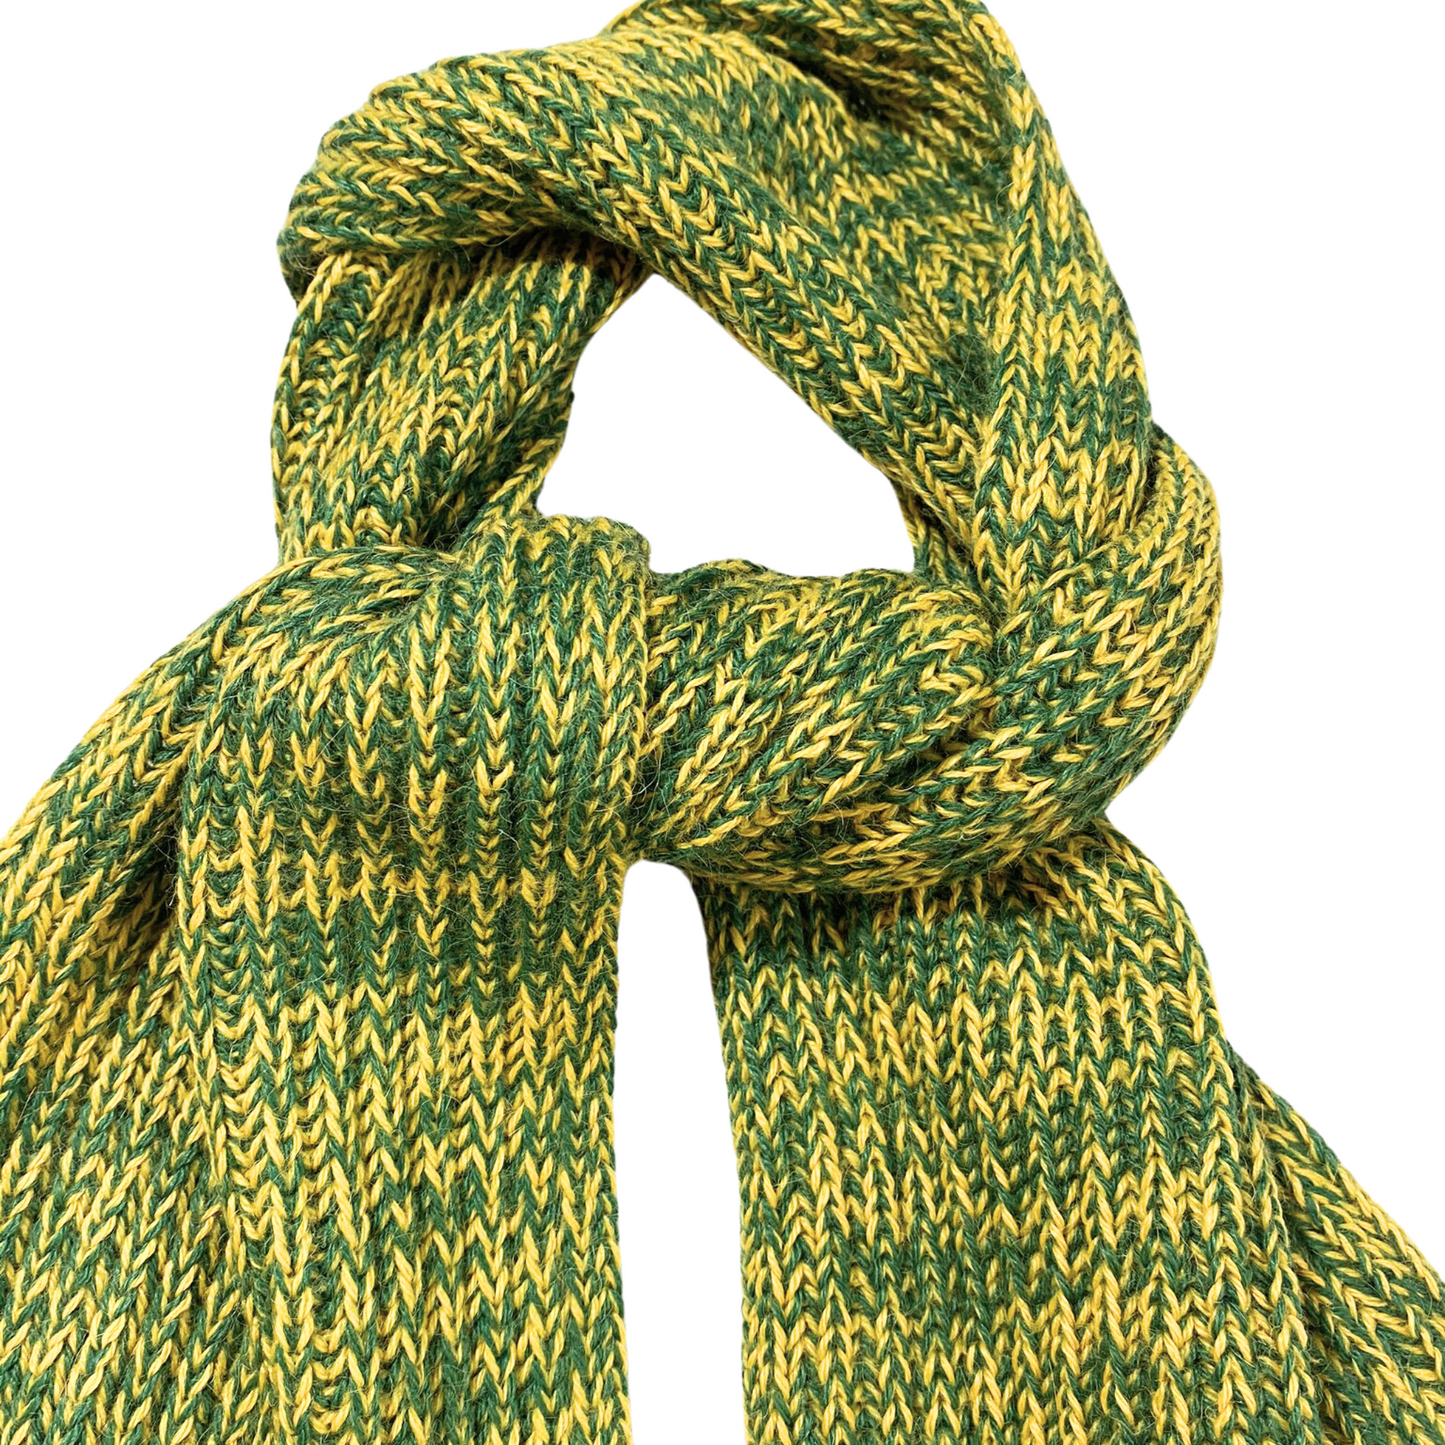 Alpaca Knitted Scarf - Green and Yellow